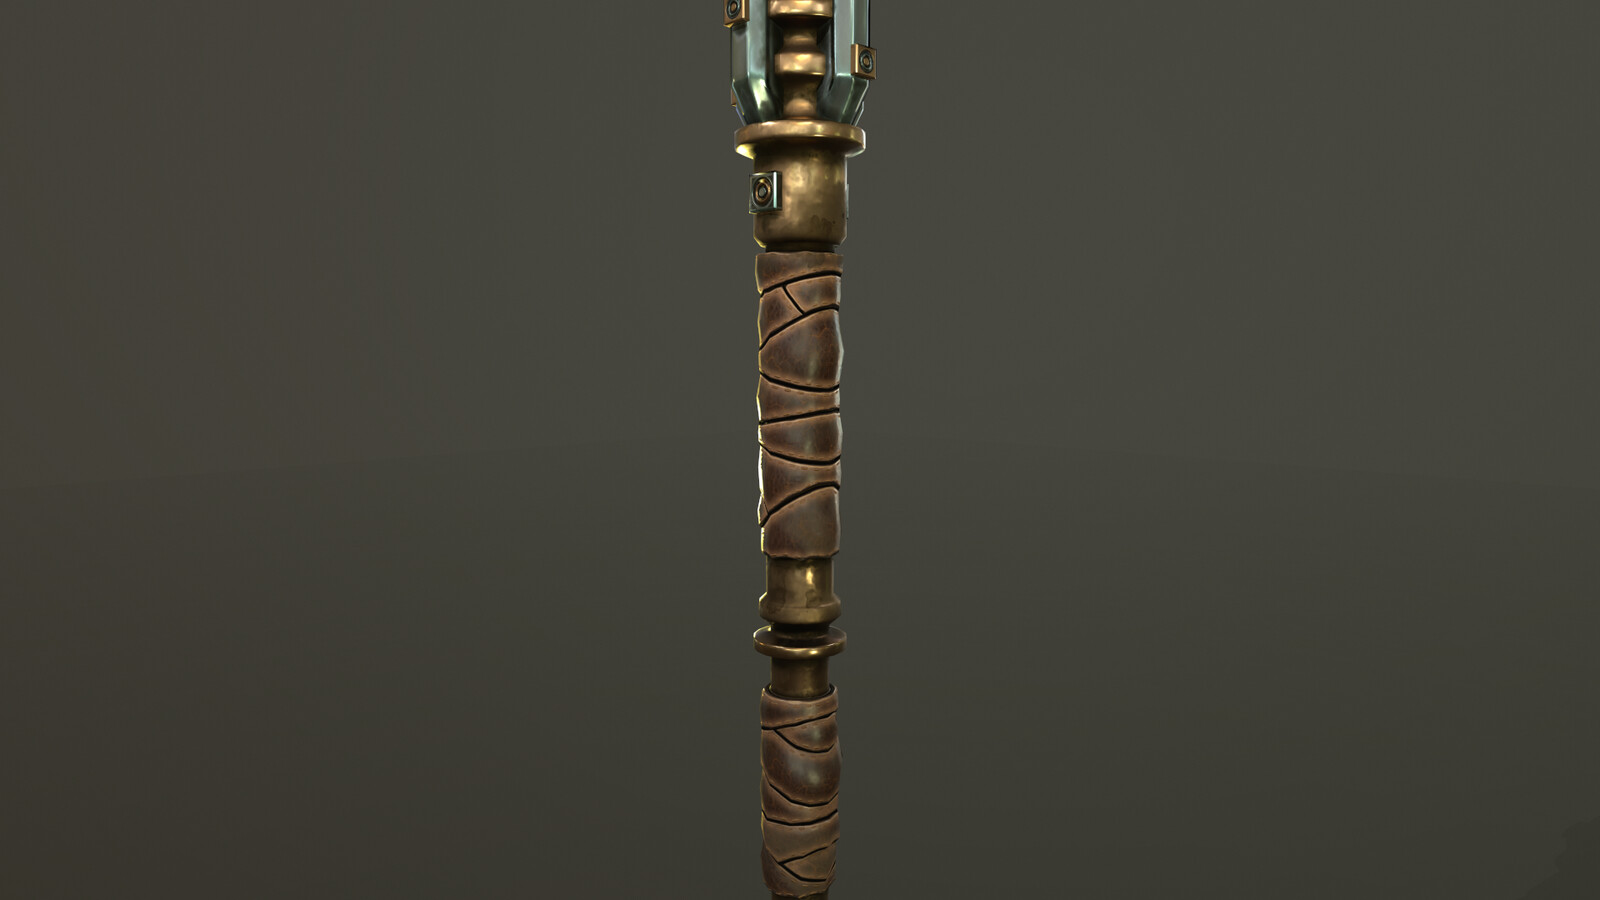 Mace Render in Marmoset Focused on the Leather Grip Detail